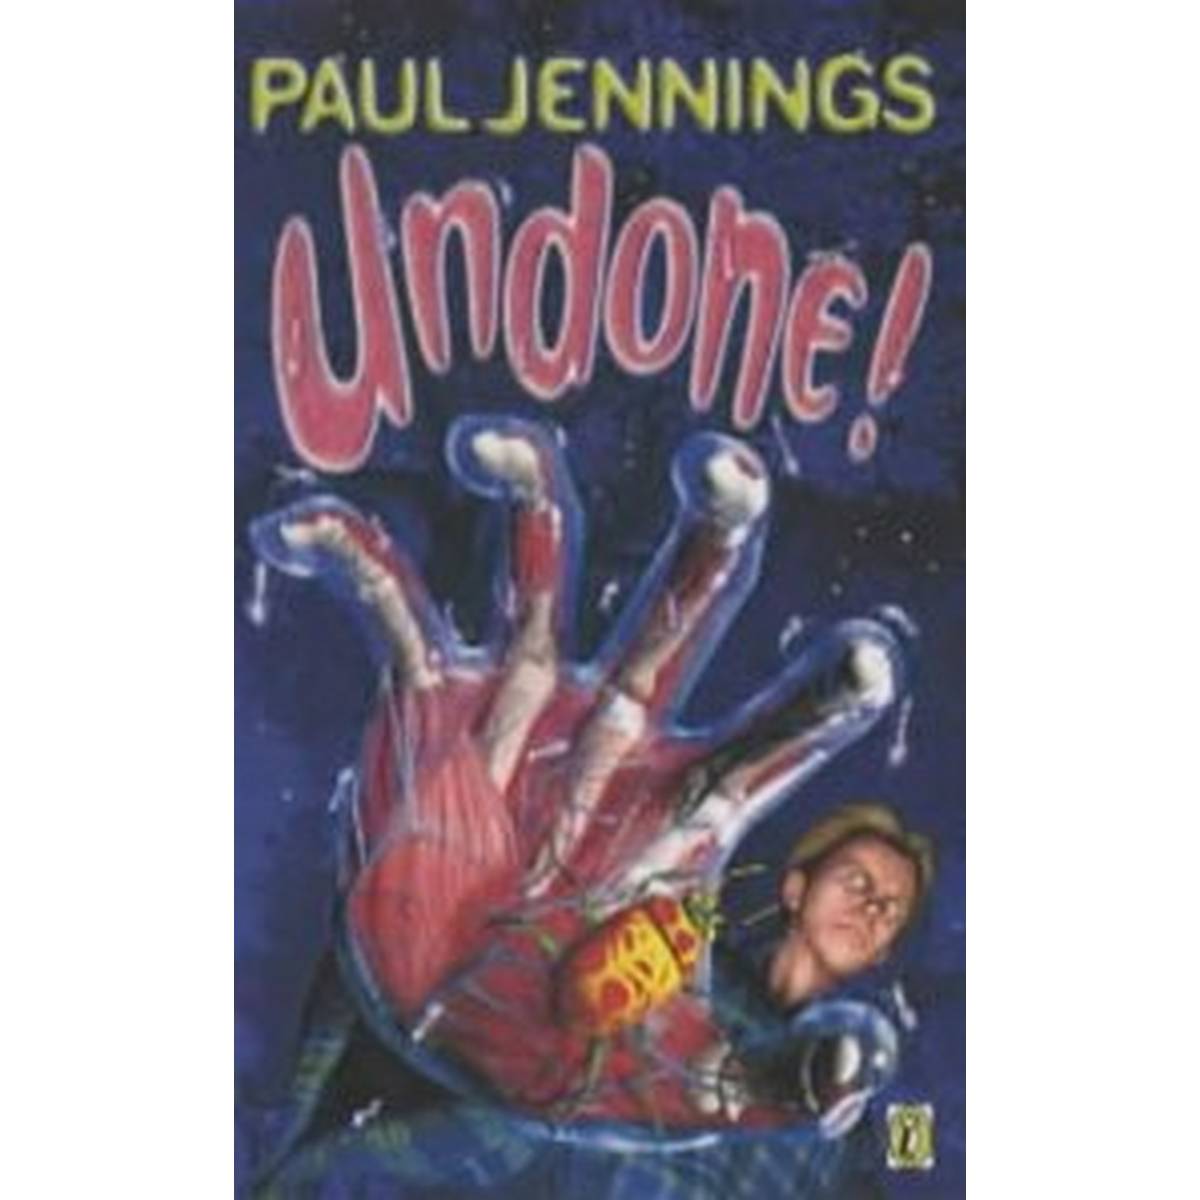 Undone!: More Mad Endings